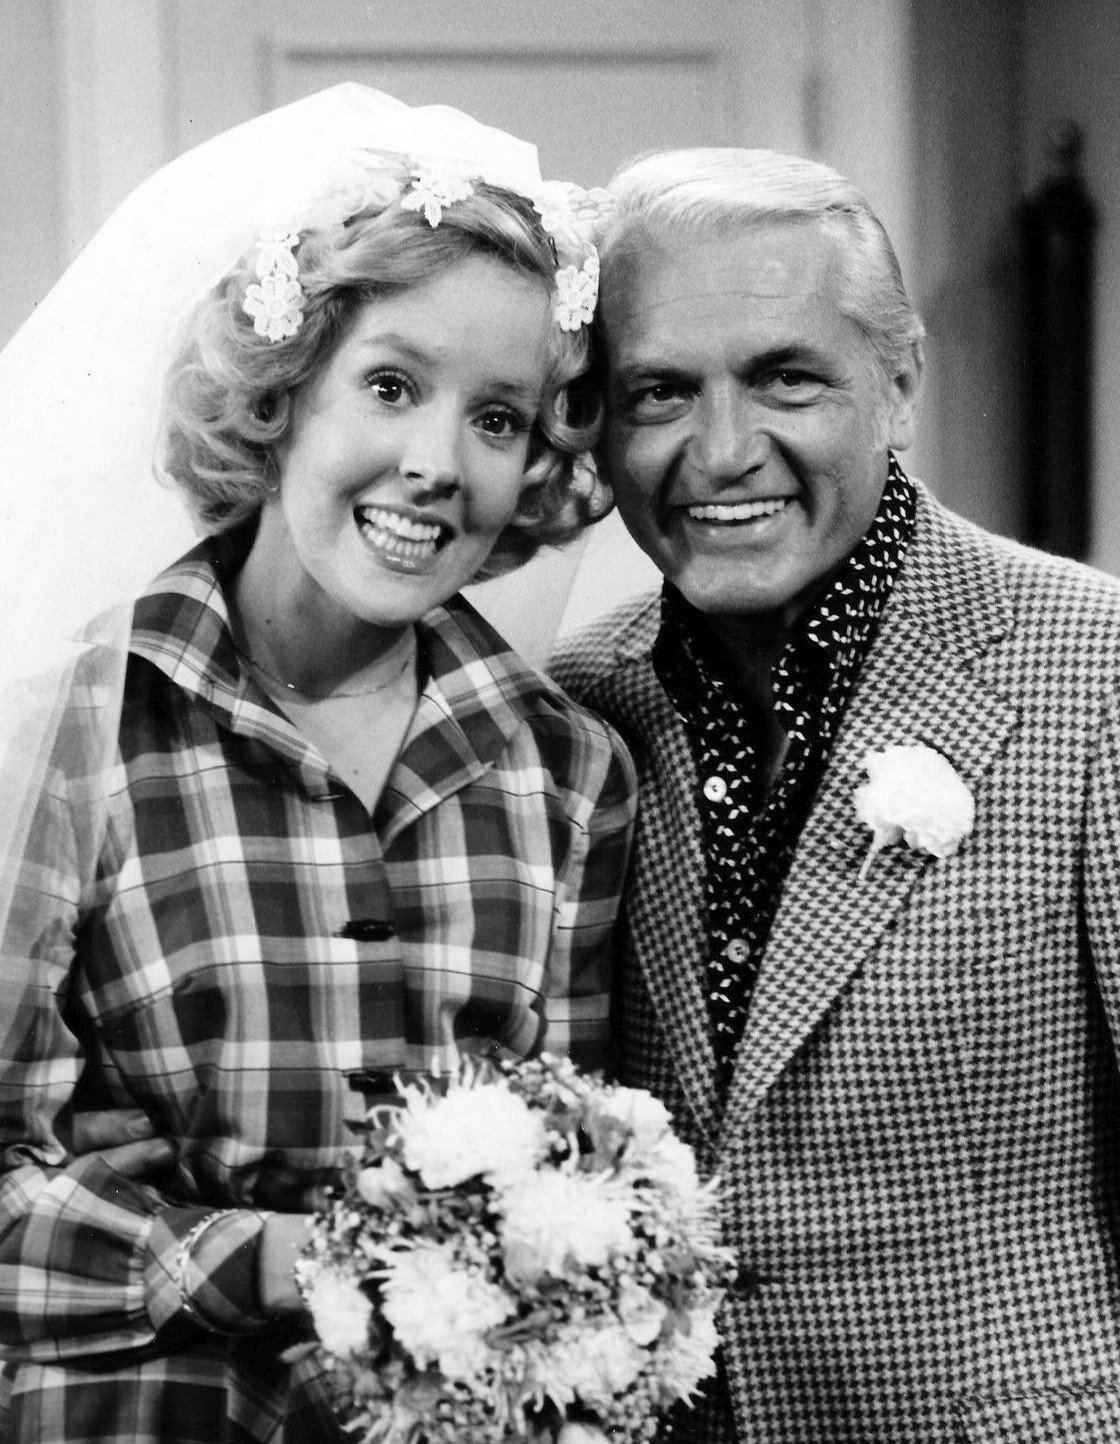 Photo of Georgia Engel and Ted Knight from the television program "The Mary Tyler Moore Show," in 1975. | Photo: Wikimedia Commons